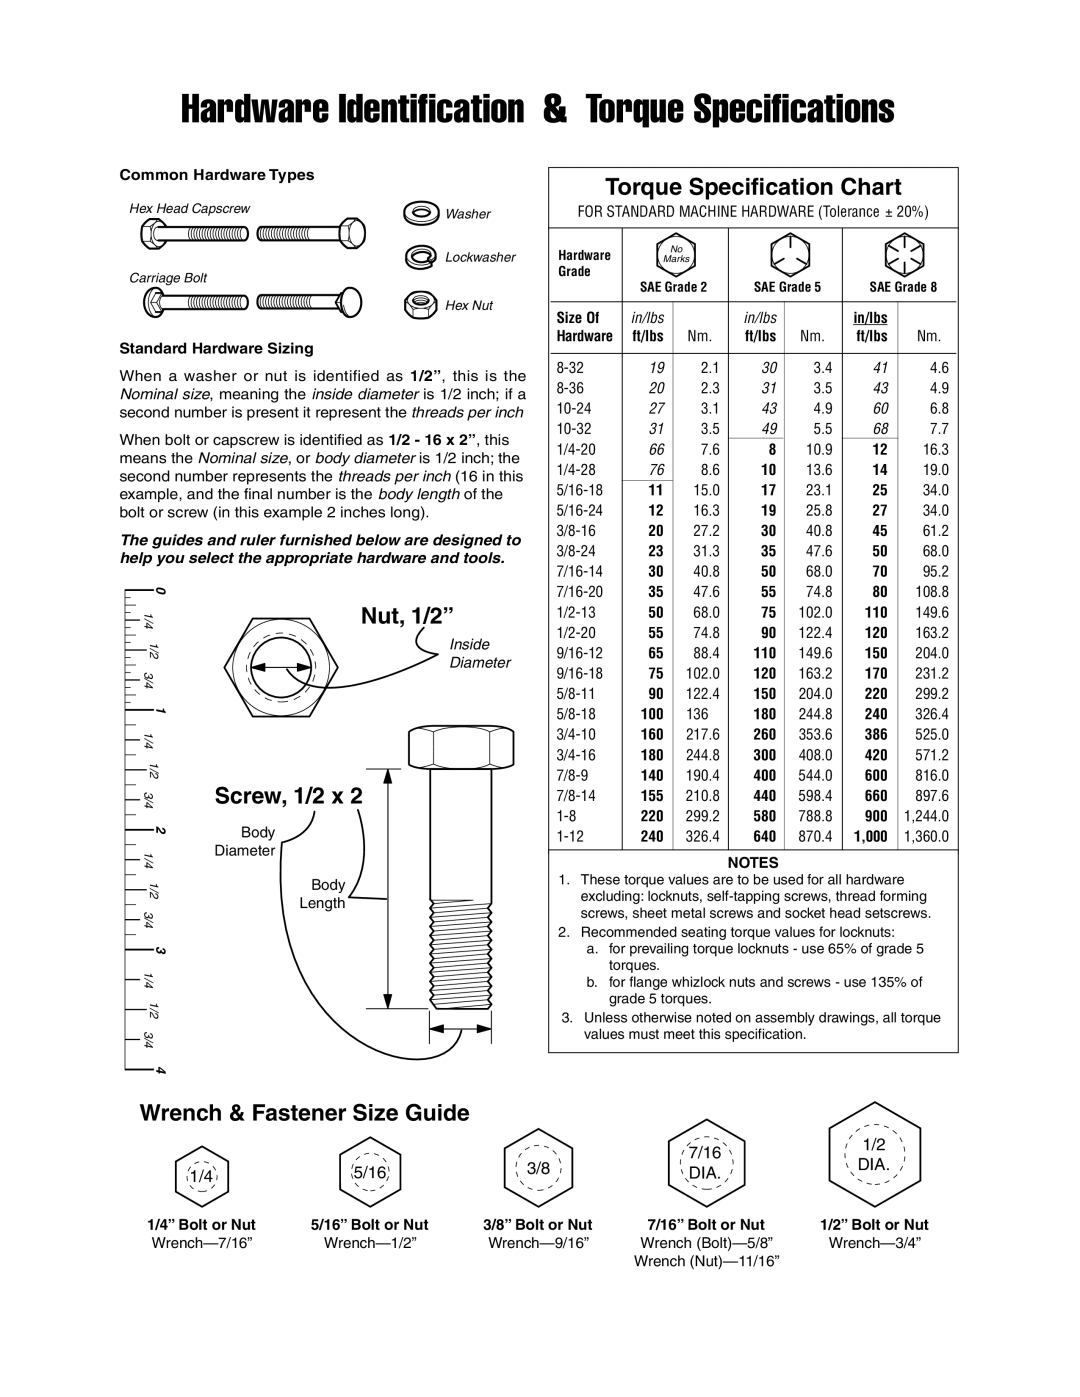 Simplicity 1694692 Wrench & Fastener Size Guide, Hardware Identification & Torque Specifications, Nut, 1/2”, Screw, 1/2 